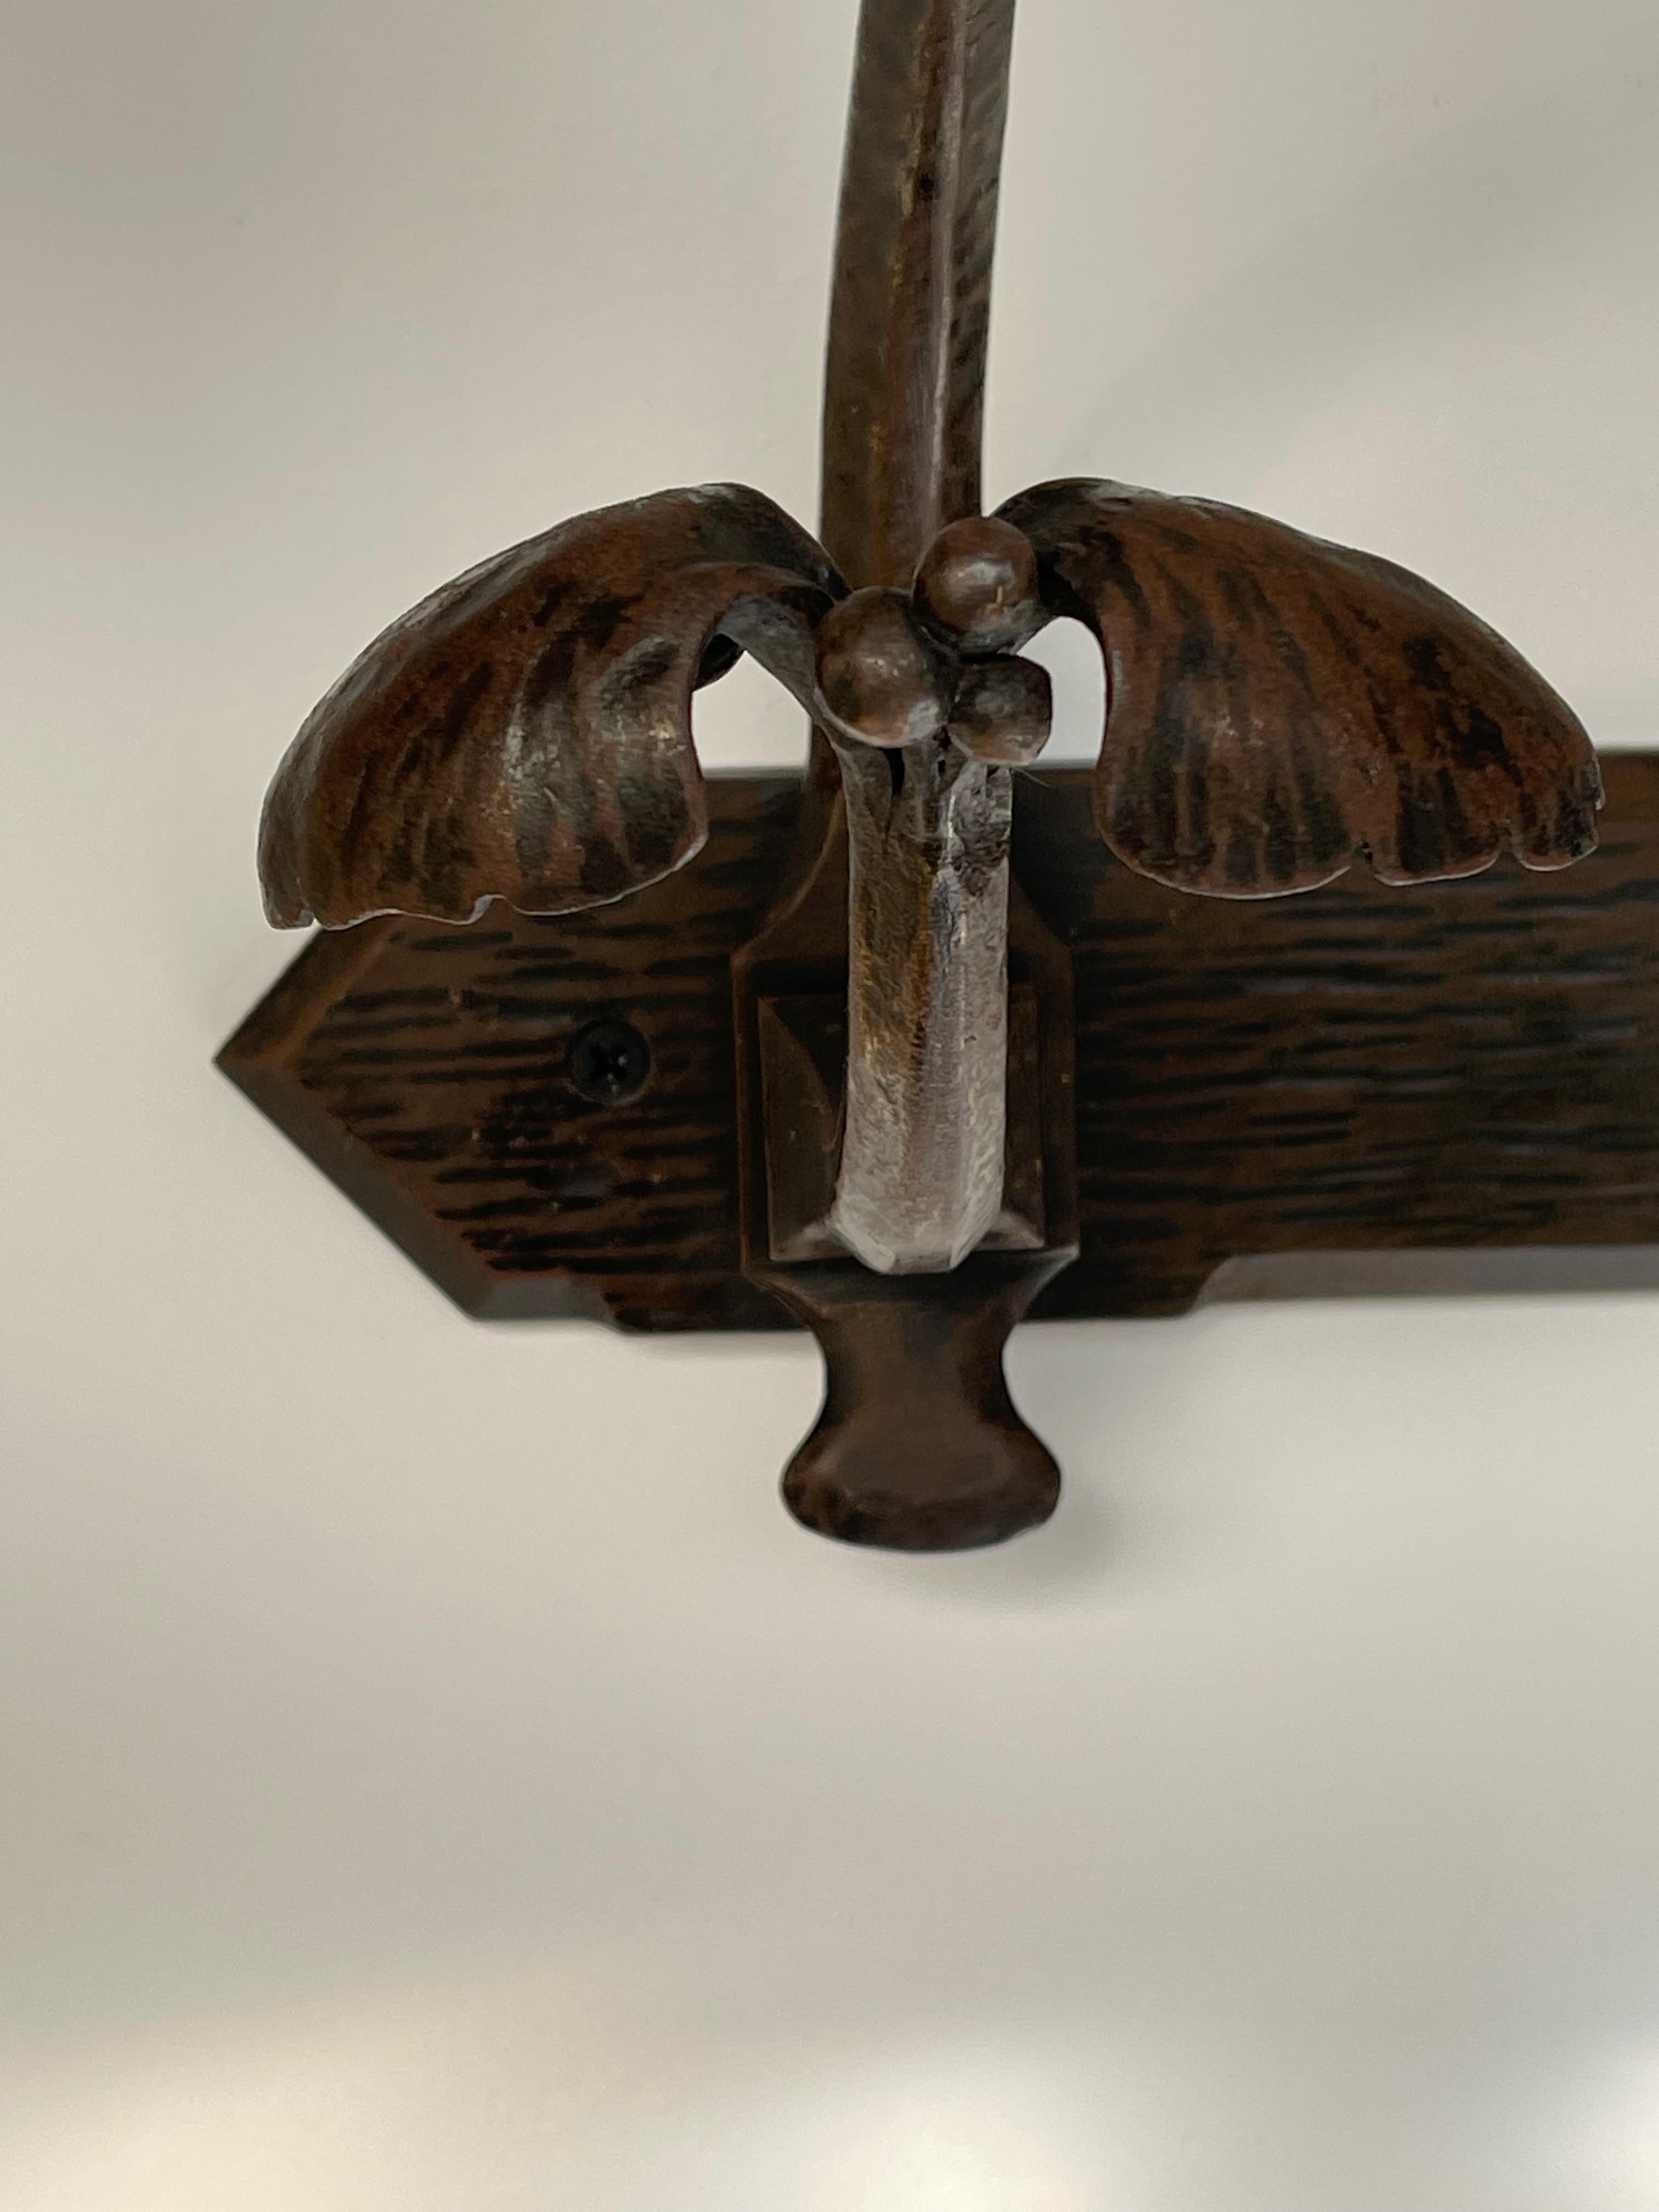 Art deco coat rack circa 1910 by Edgar Brandt.
Stamped Brandt.
Wrought iron decorated with ginko biloba leaves.
In perfect condition, ready to hang.
2 fixing holes.

Height: 34cm
Depth: 18cm
Width: 90cm
Weight: 8 Kg

You can contact me